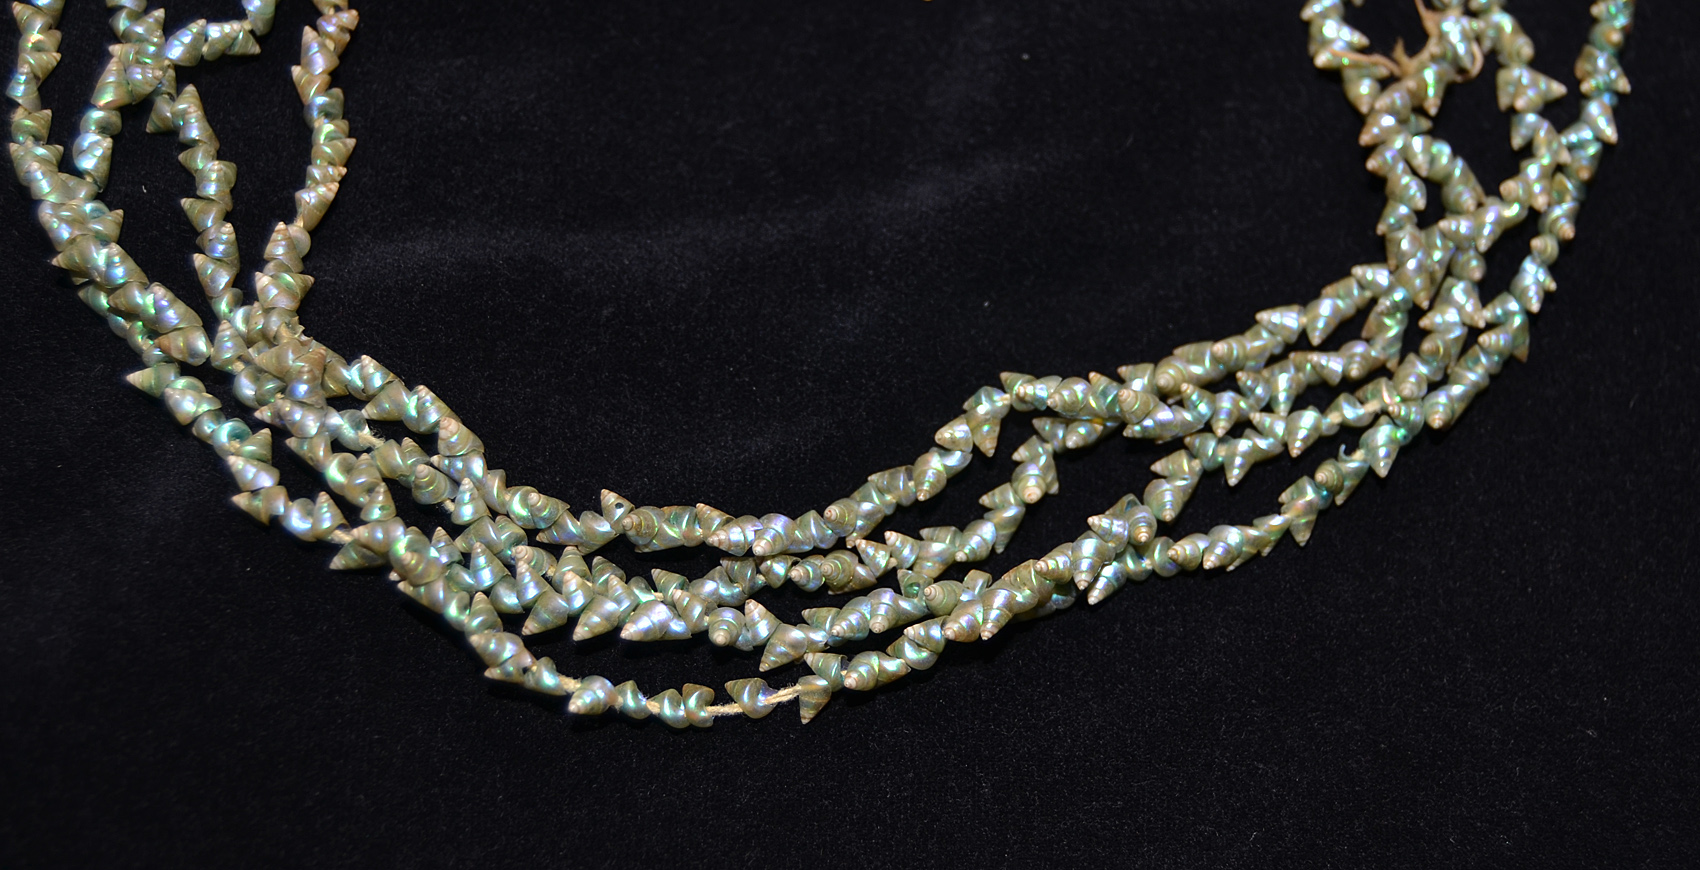 A Superb Old Australian Tasmanian Indigenous Maireener Shell Necklace19th C